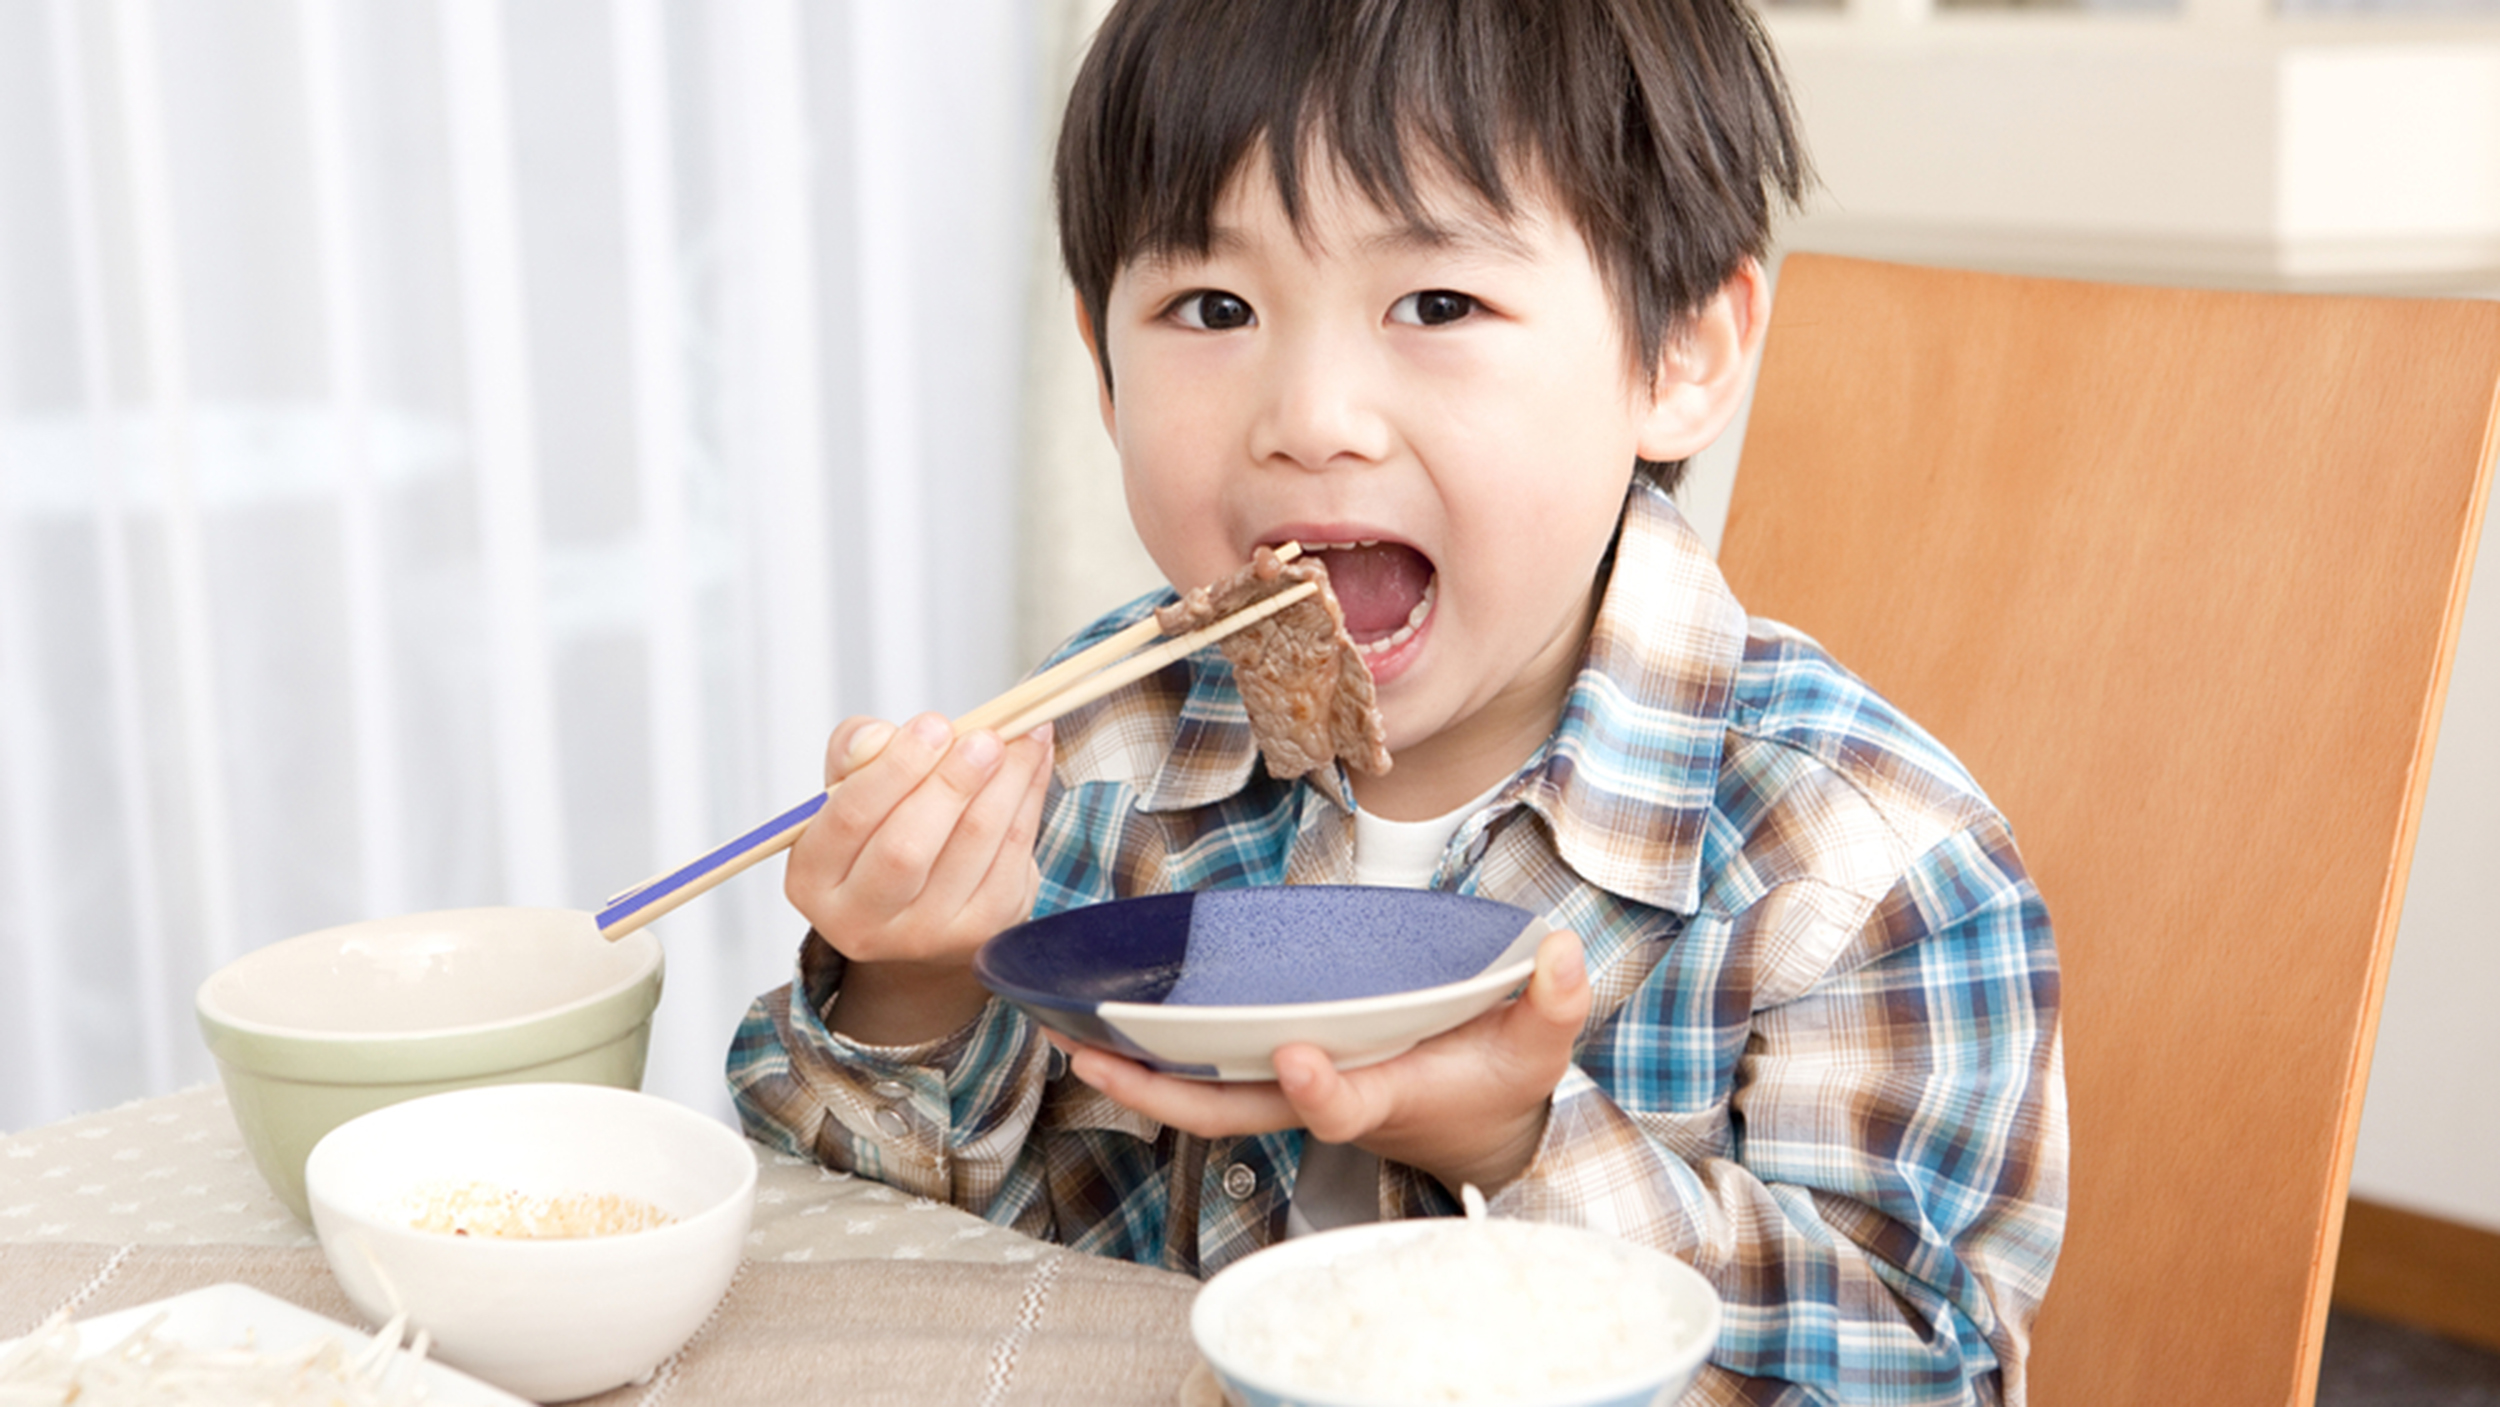 Why Japan's children have the longest healthy life expectancy